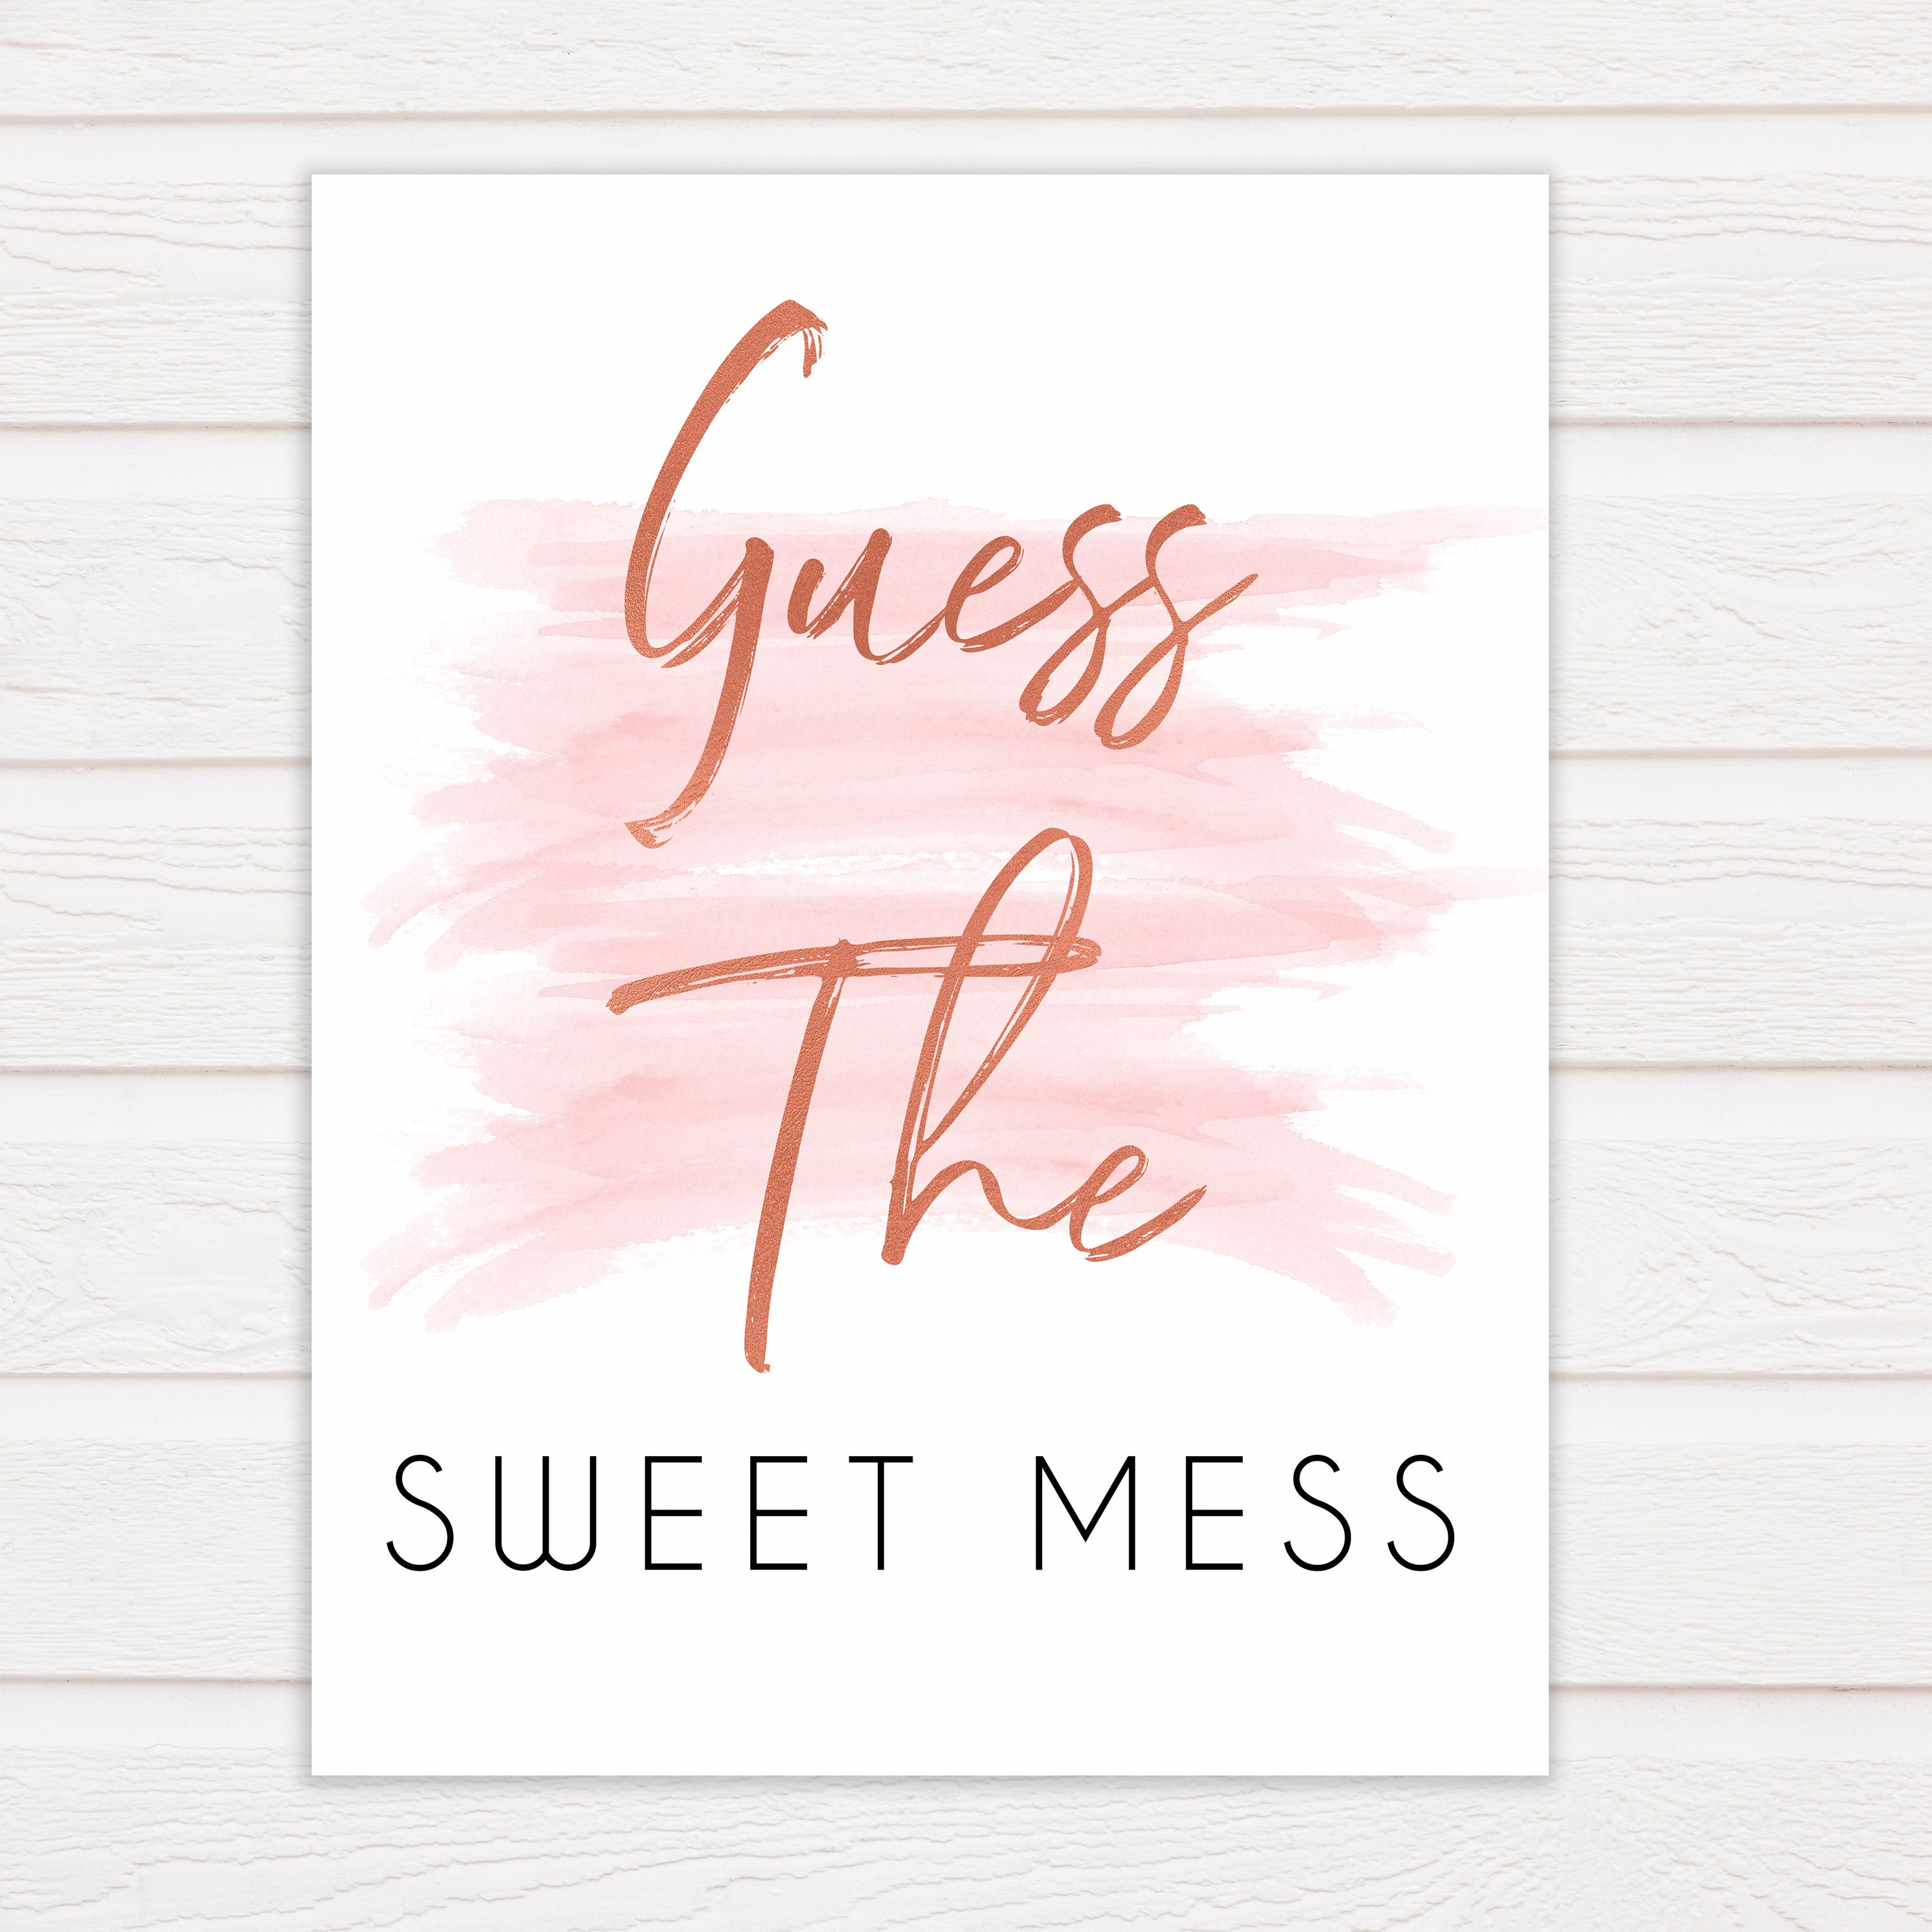 Pink Swash Baby Shower Guess The Mess Game, Printable Baby Shower Games, Guess The Sweet Mess, Baby Shower Games, Guess The Mess, Game, popular baby games, fun baby games, printable baby games